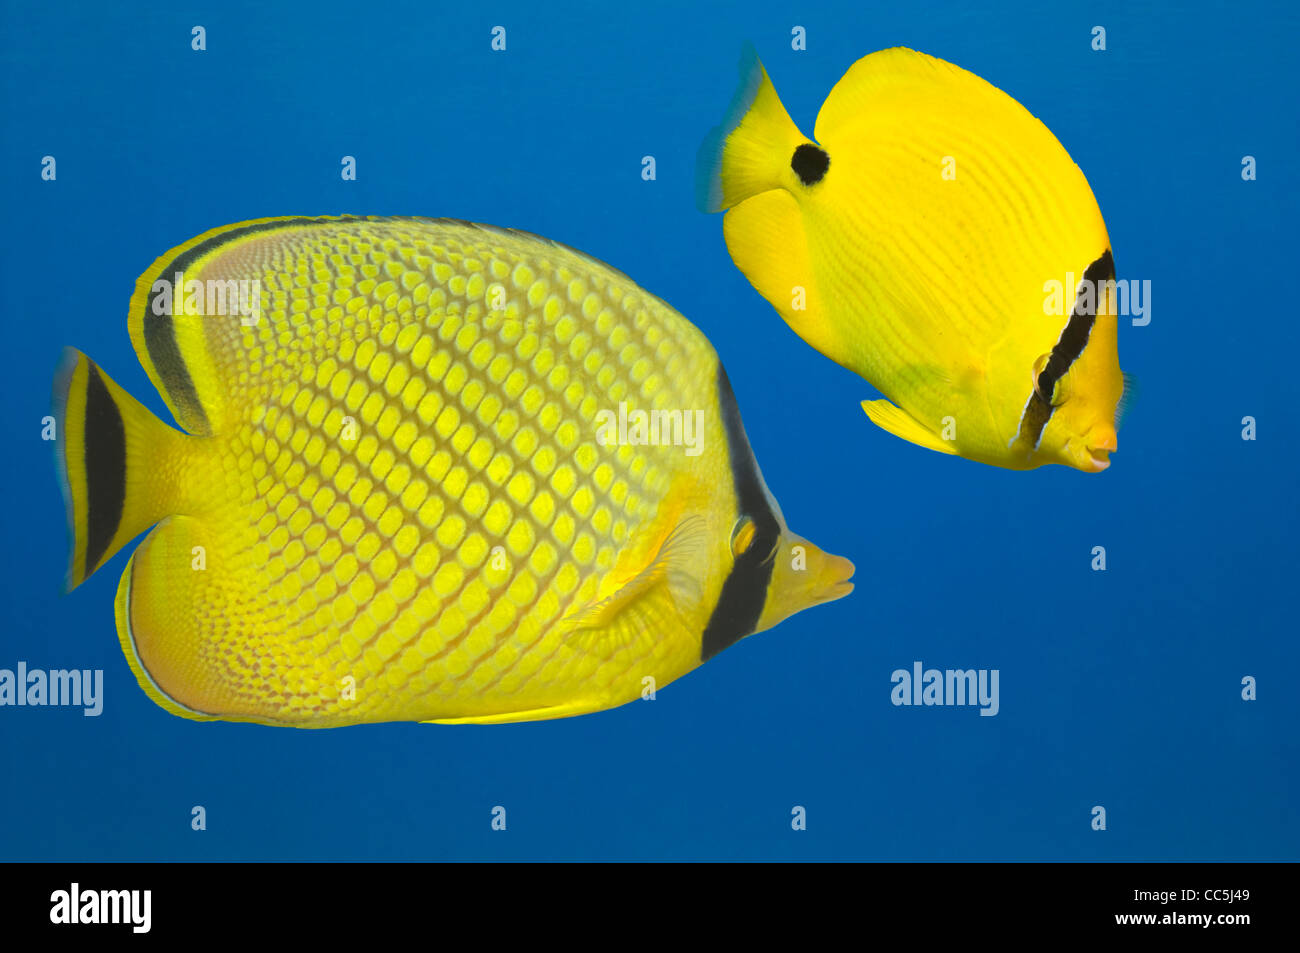 Cut out of Latticed butterflyfish (Chaetodon rafflesi) and  Yellow butterflyfish (Chaetodon andamanensis). Stock Photo